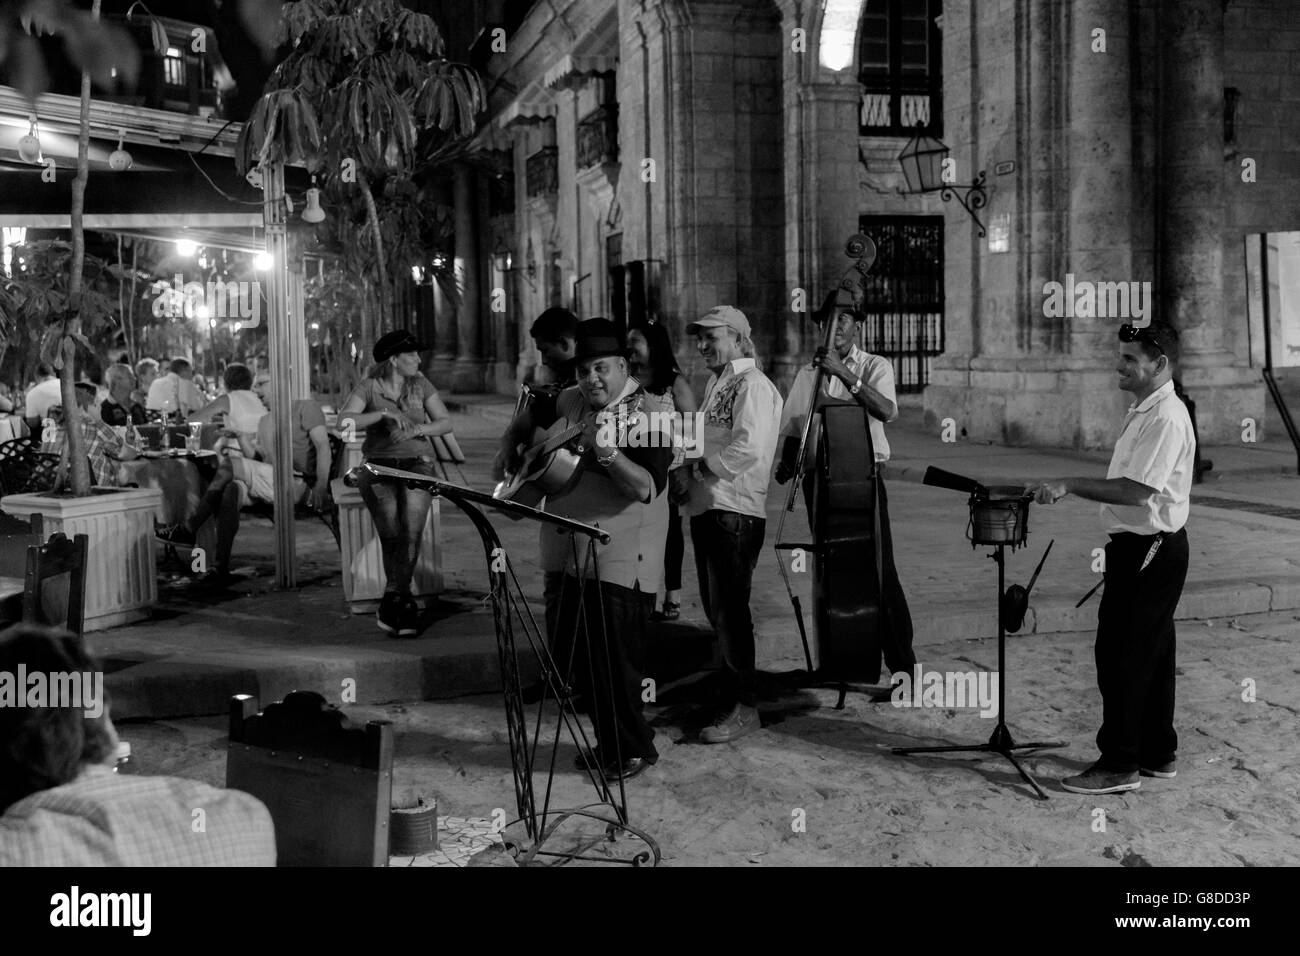 Cuban orchestra plays in front of the restaurant at night in Old Havana, Cuba, near Plaza de Armas square. Black & white image. Stock Photo